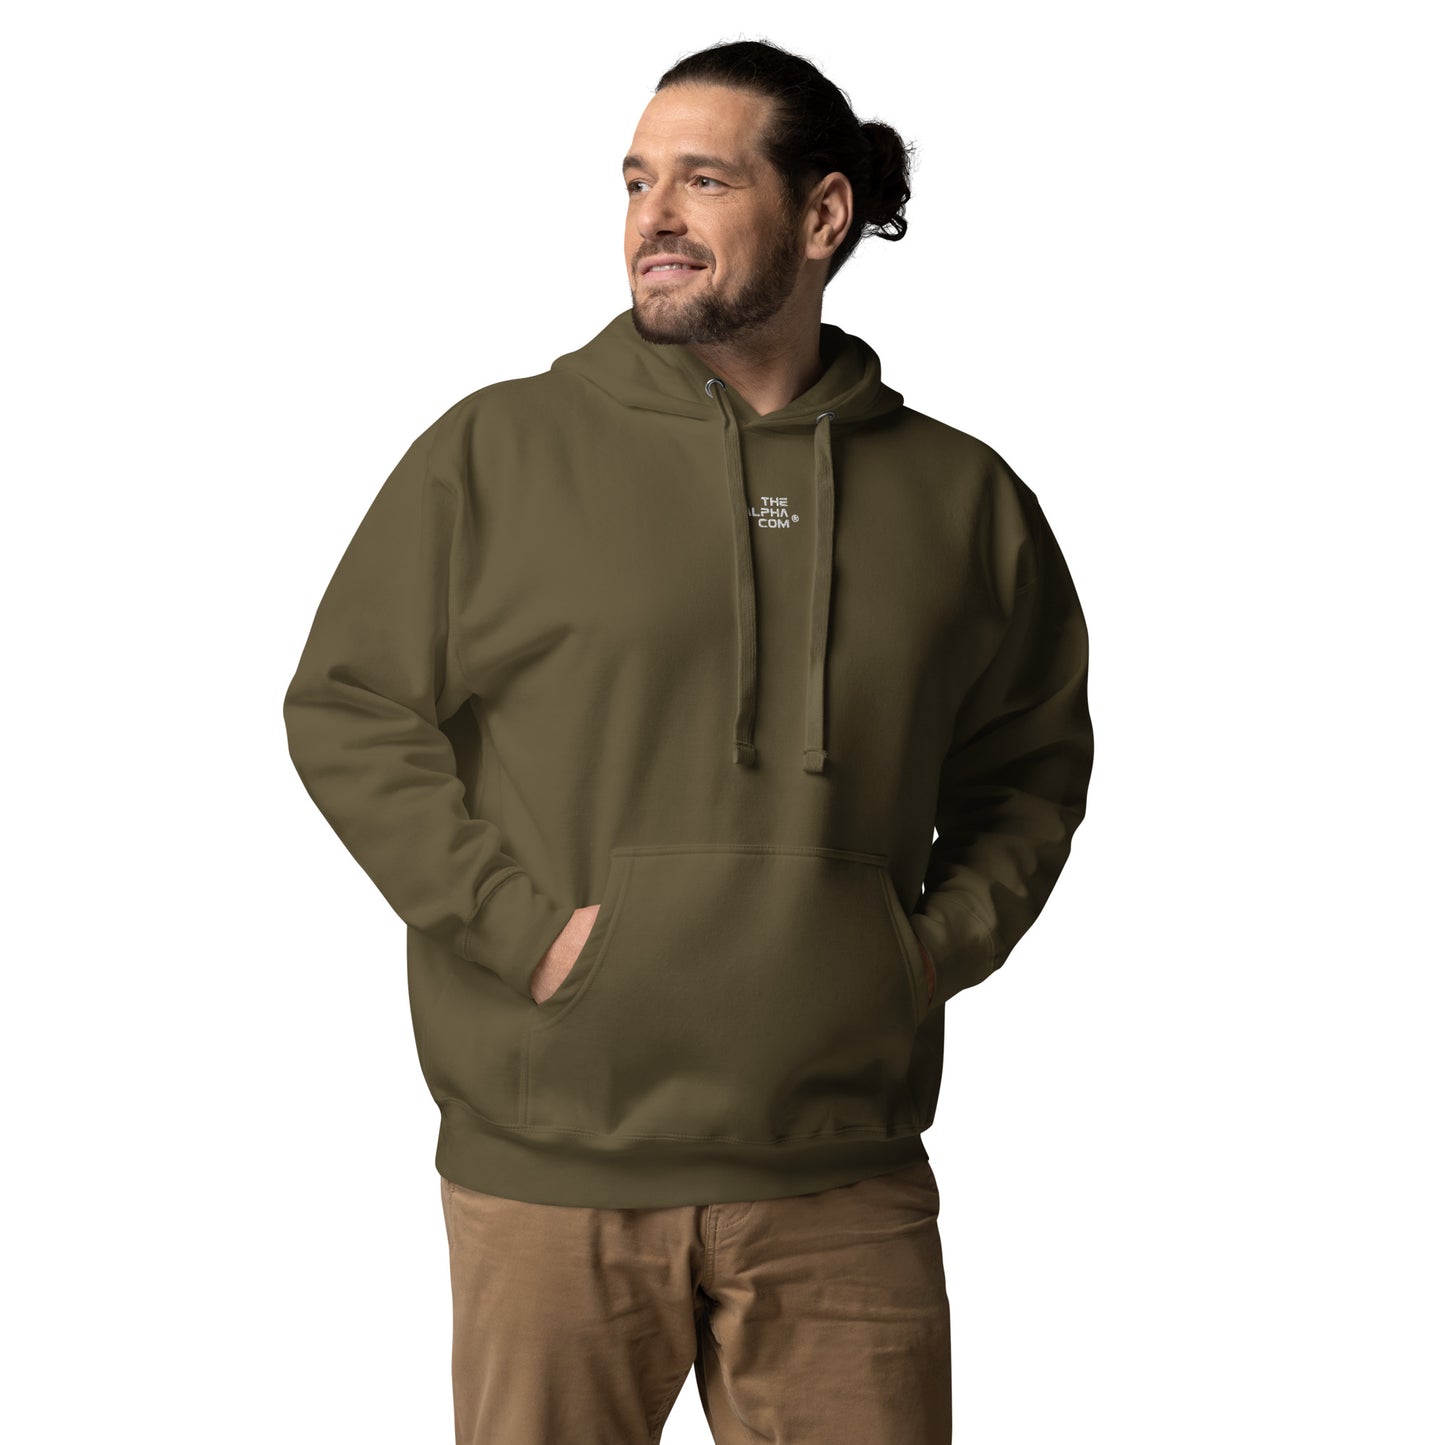 THE ALPHA COM ® GRW embroidered Unisex Hoodie - THE ALPHA